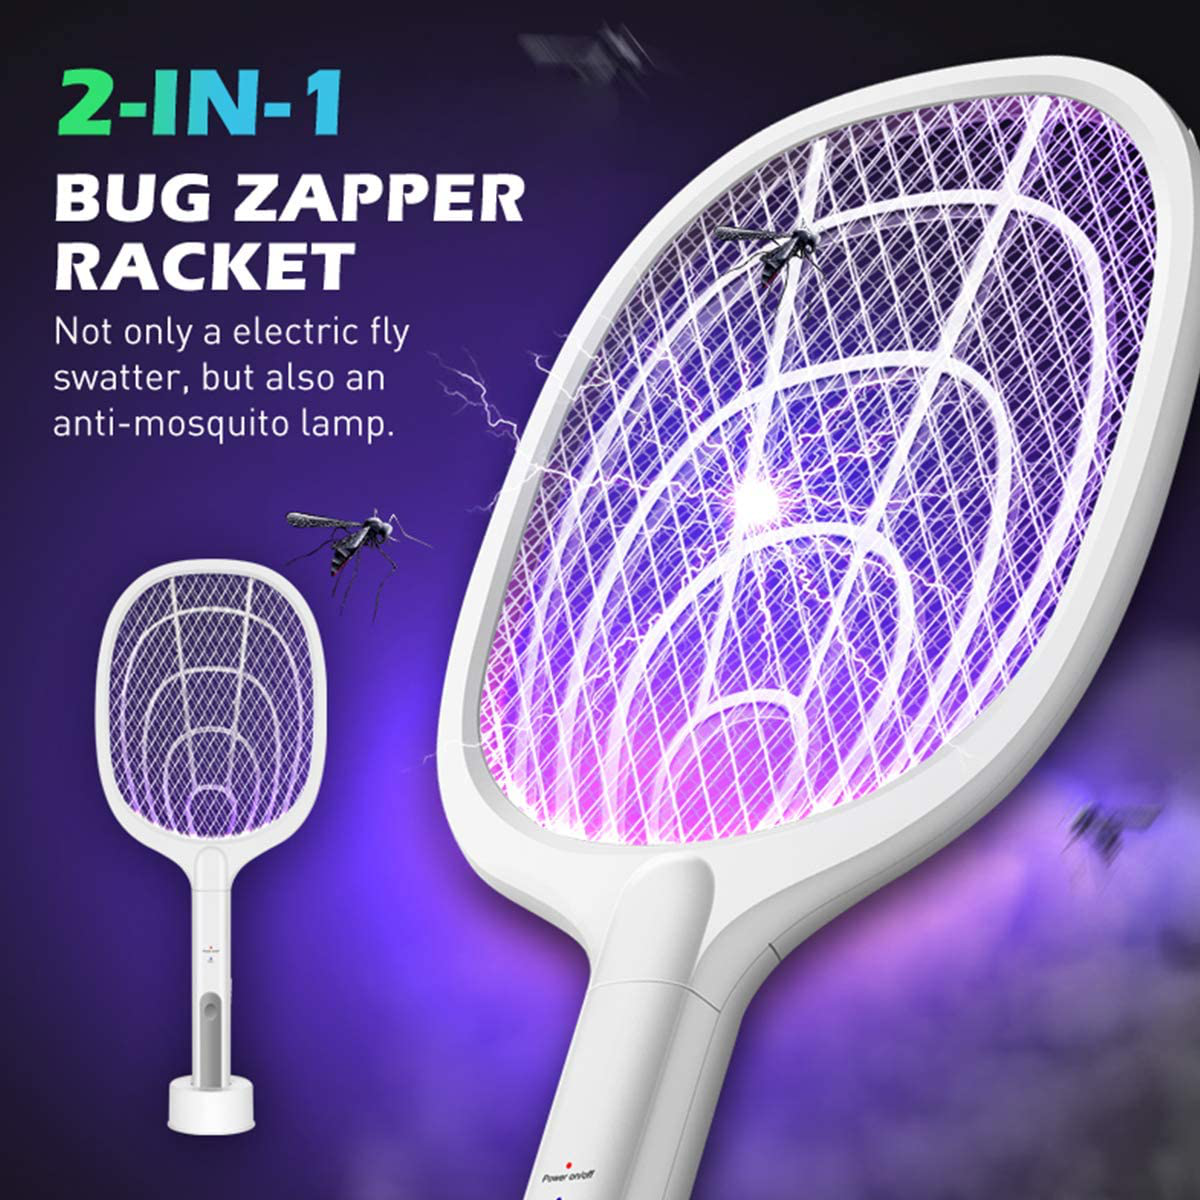 AICase Bug Zapper, 3000 Volt Indoor & Outdoor Electric Fly Swatter, USB Rechargeable Mosquito Killer Racket for Home Bedroom, Kitchen,Office, Backyard, Patio,Safe to Touch with 3-Layer Safety Mesh